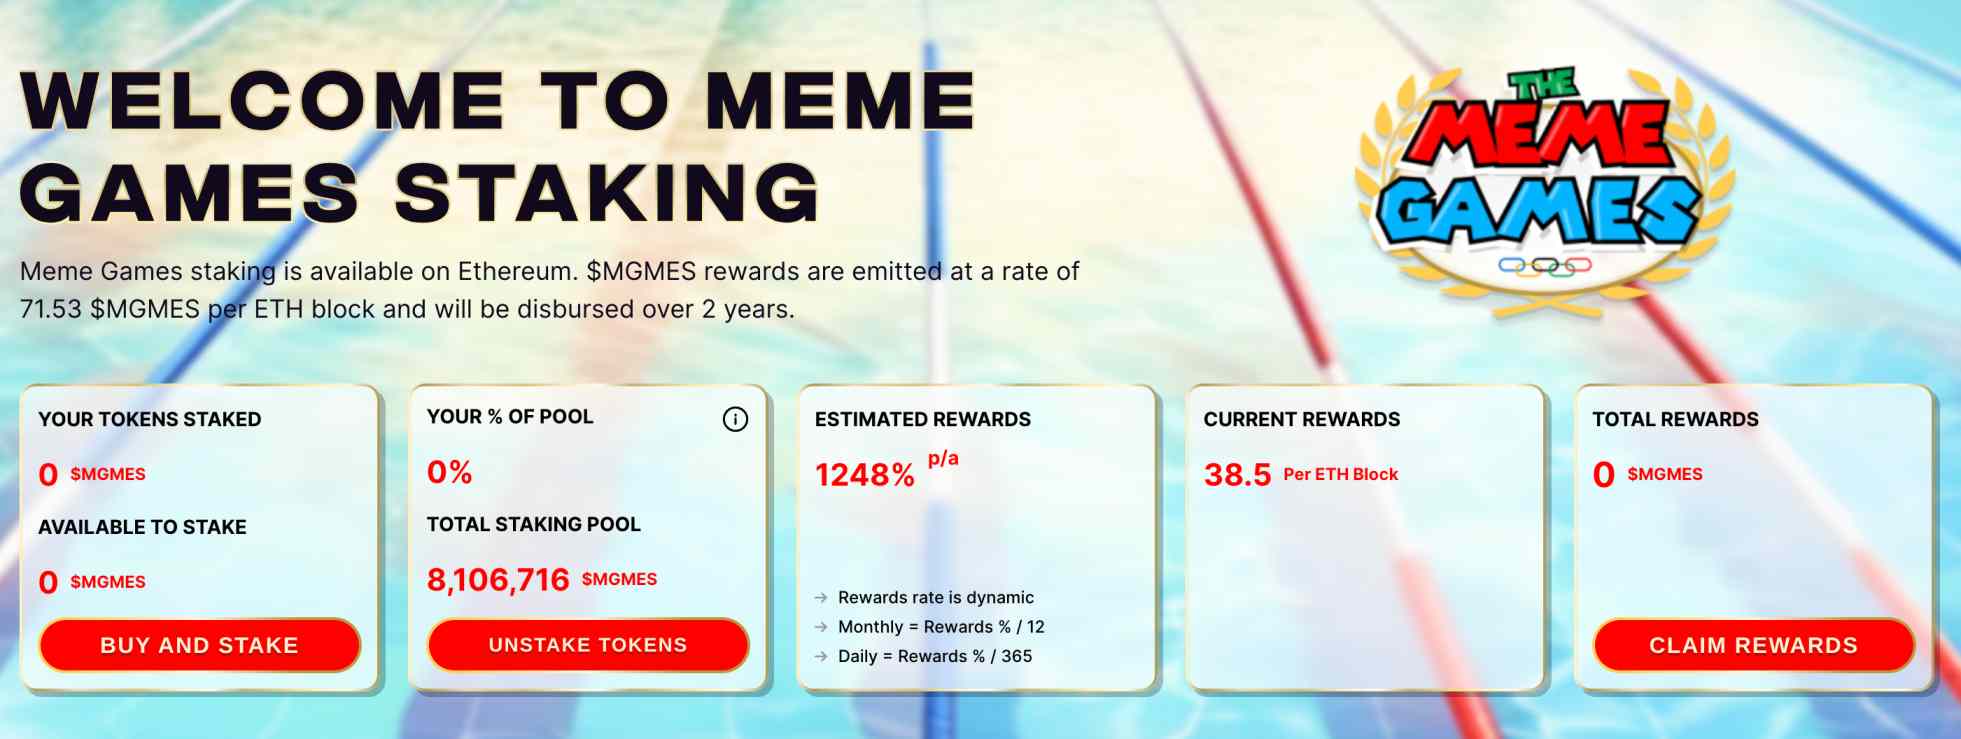 The Meme Games staking